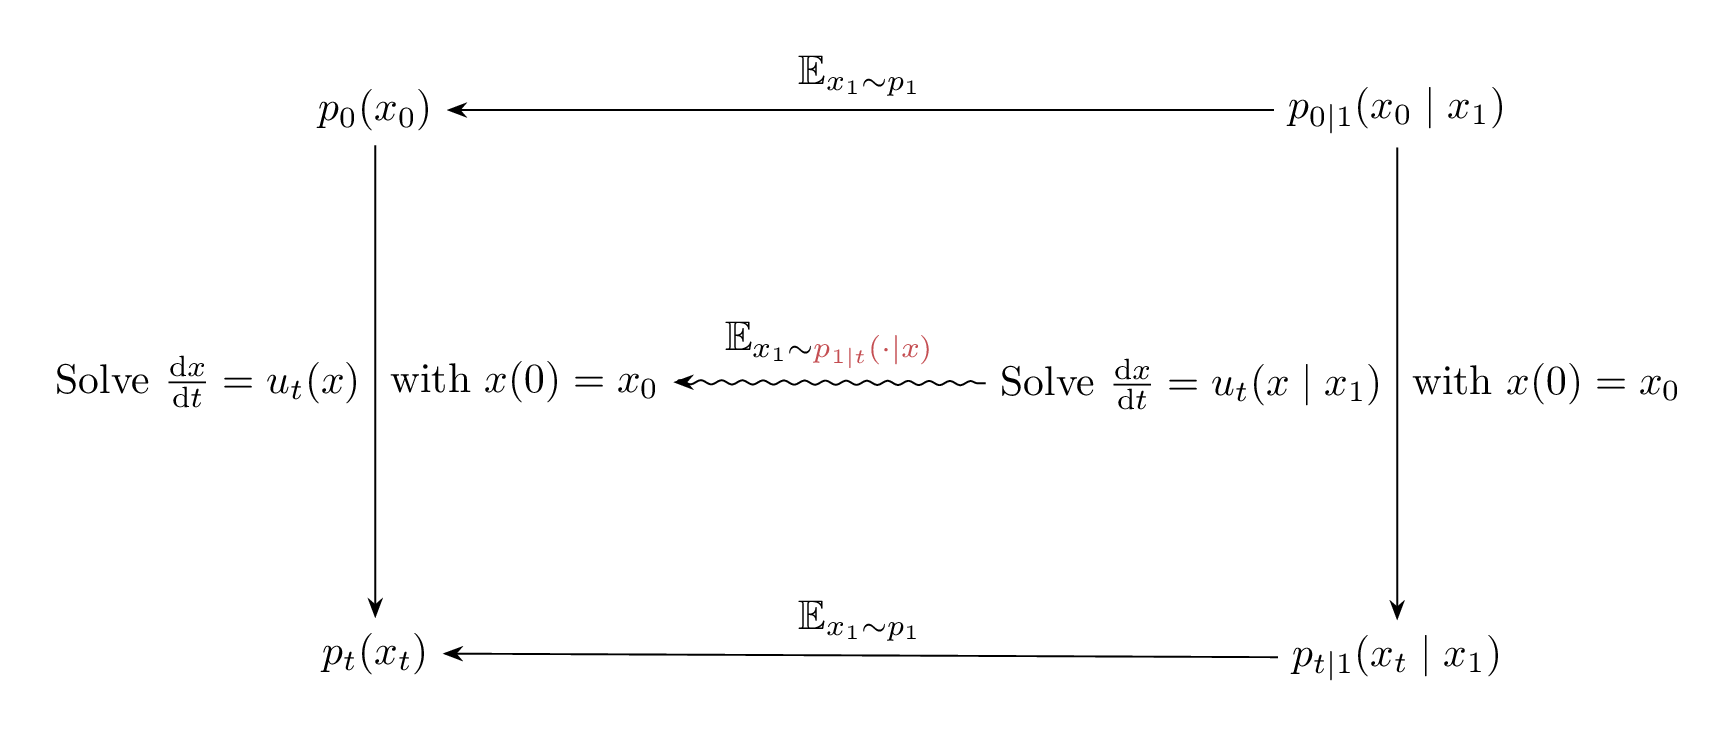 Diagram illustrating the relation between the vector fields $u_t(x_0)$, $u_t(x_0 \mid x_1)$, and their induced marginal and conditional densities.